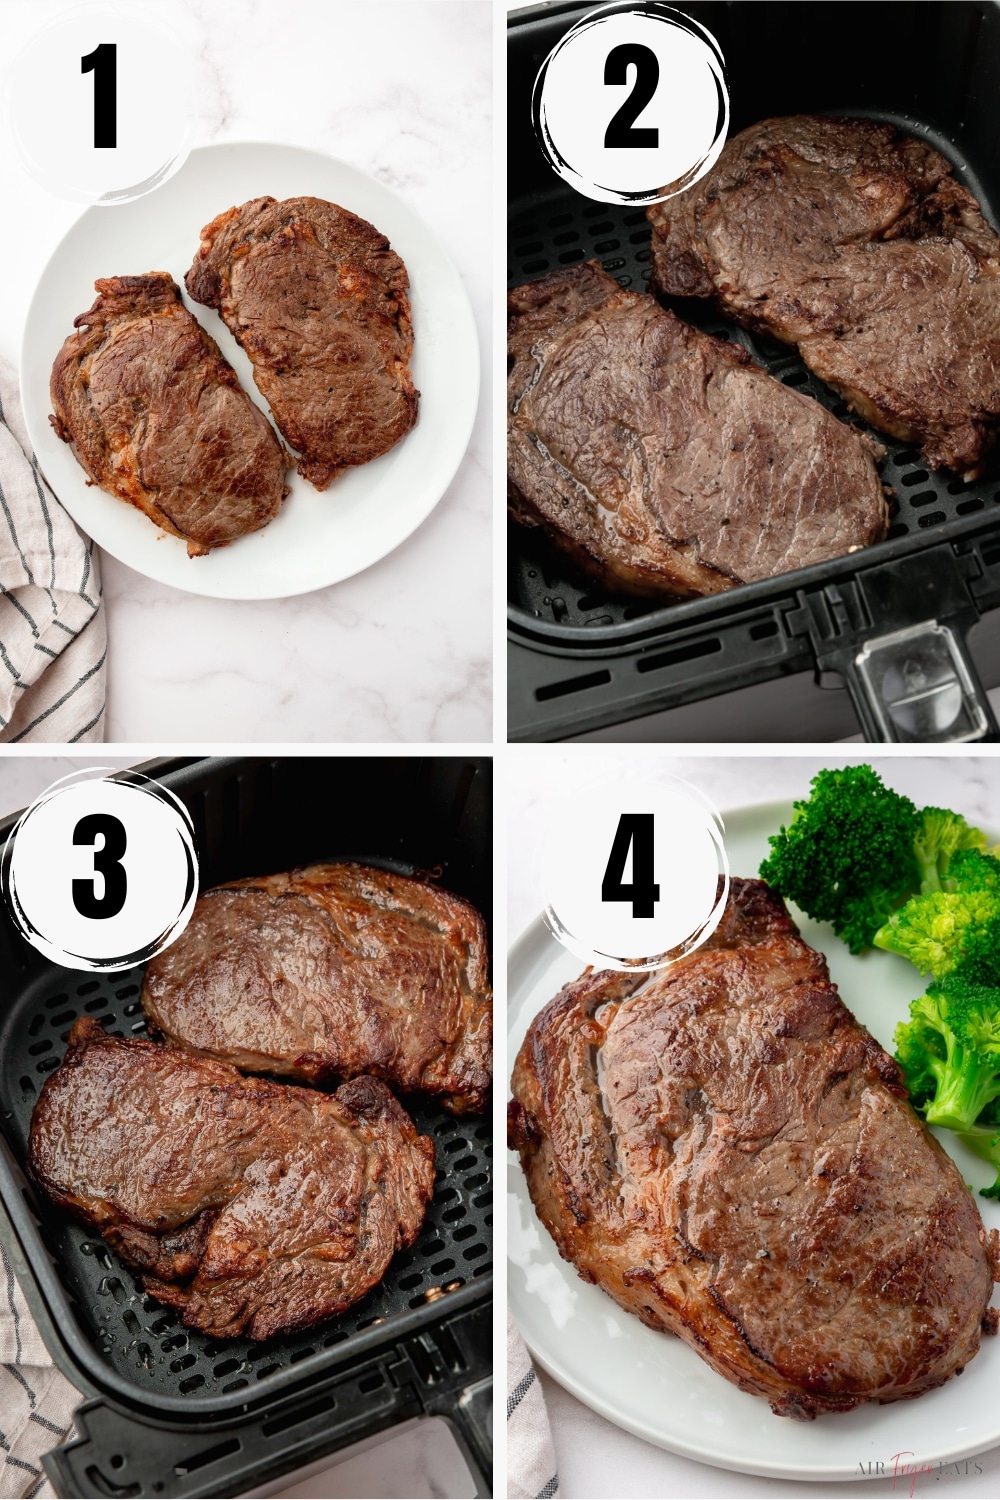 a collage of 4 numbered images showing how to reheat steak in air fryer.